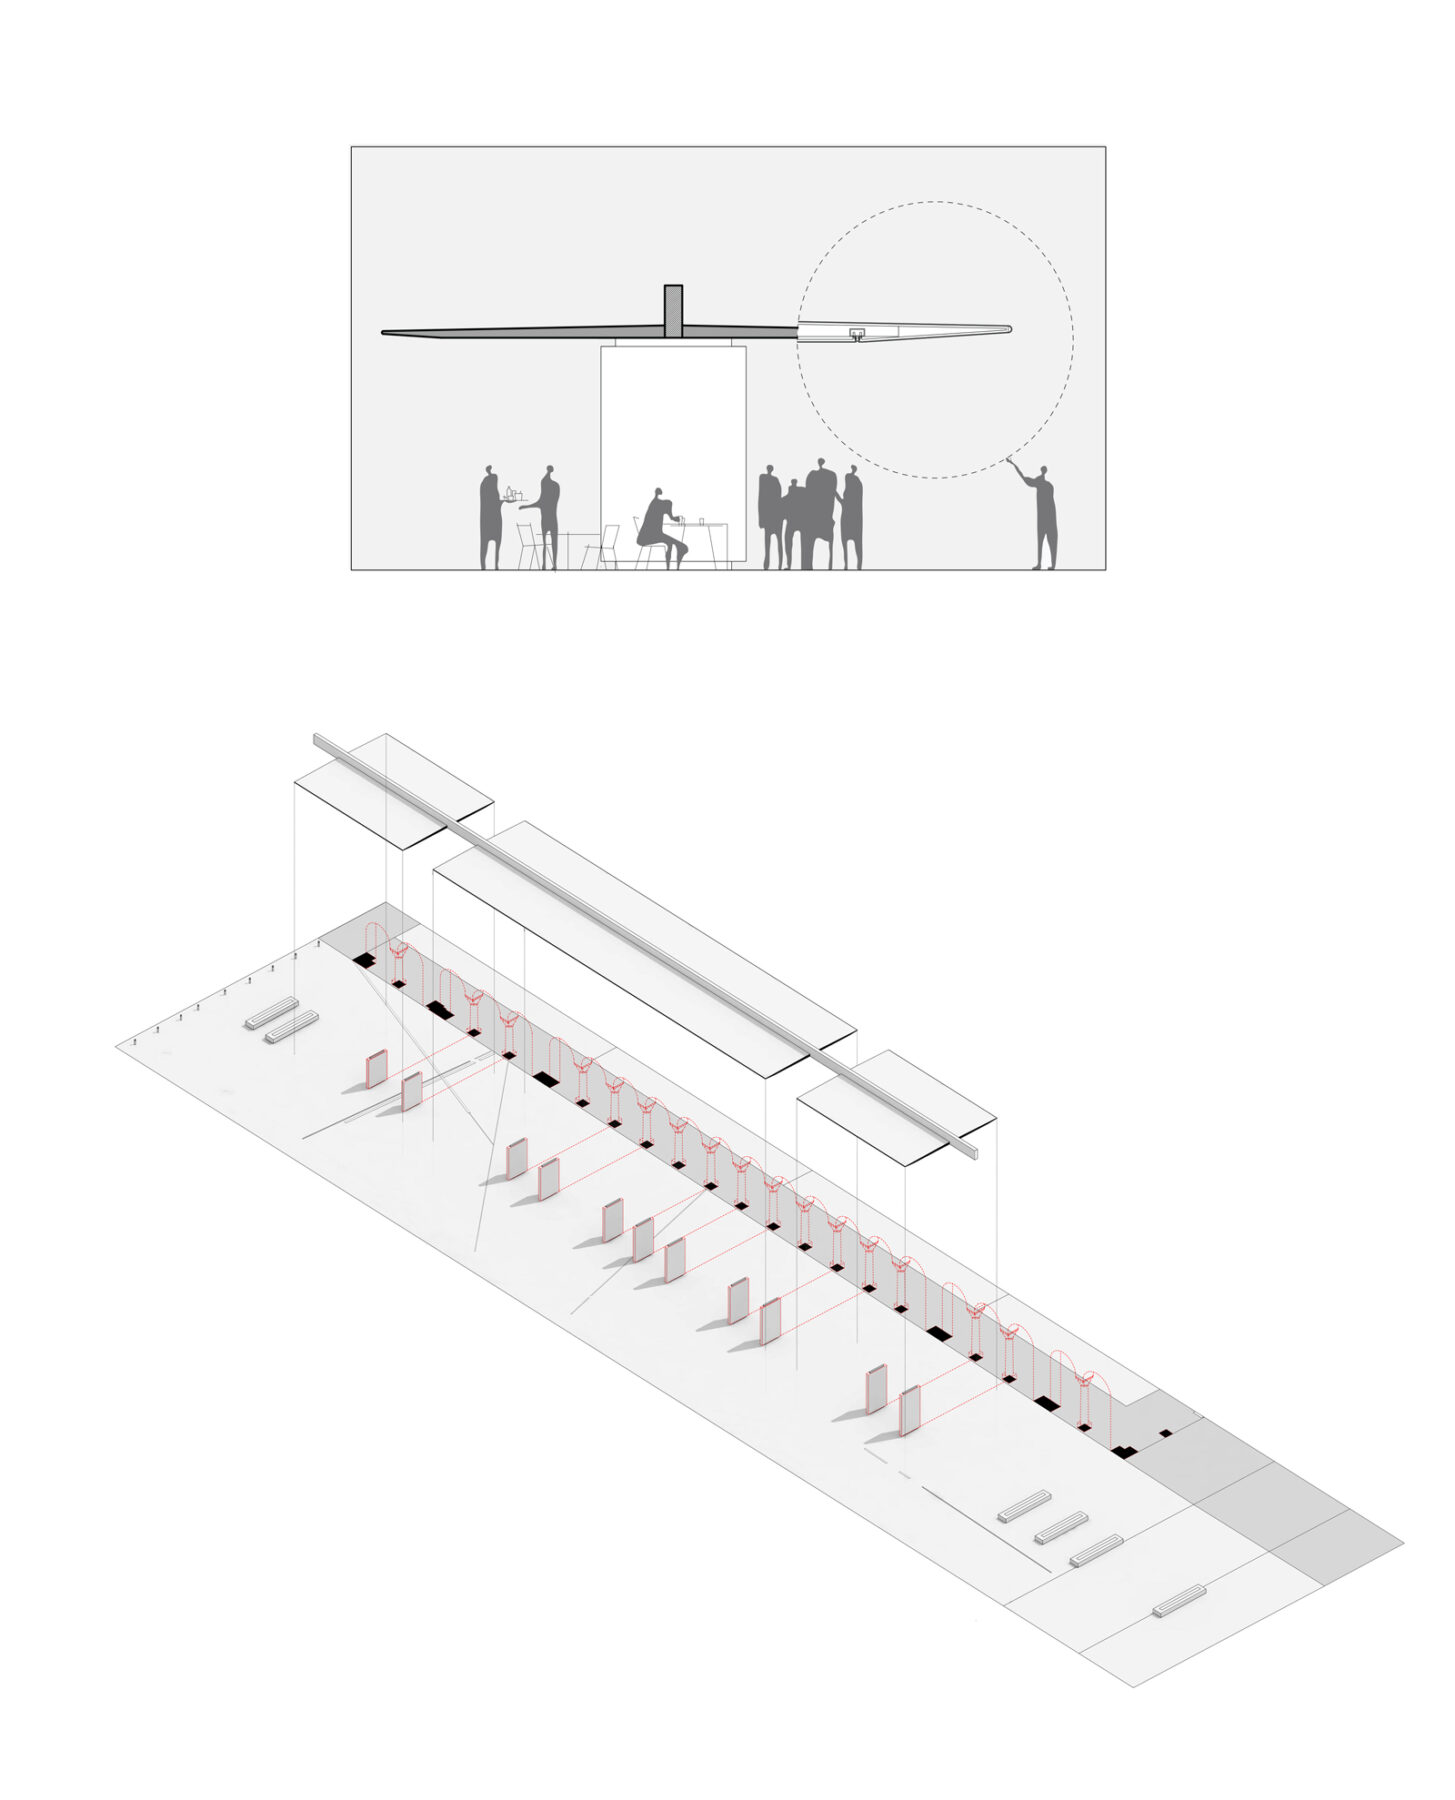 Archisearch MEMORY THREADS: architects A. Vozani and E. Fanou in collaboration with D. Panagiotopoulou, G. Voutoufianakis-Petropoulos & architecture student G. Retsos win 1st prize at the open architectural competition 